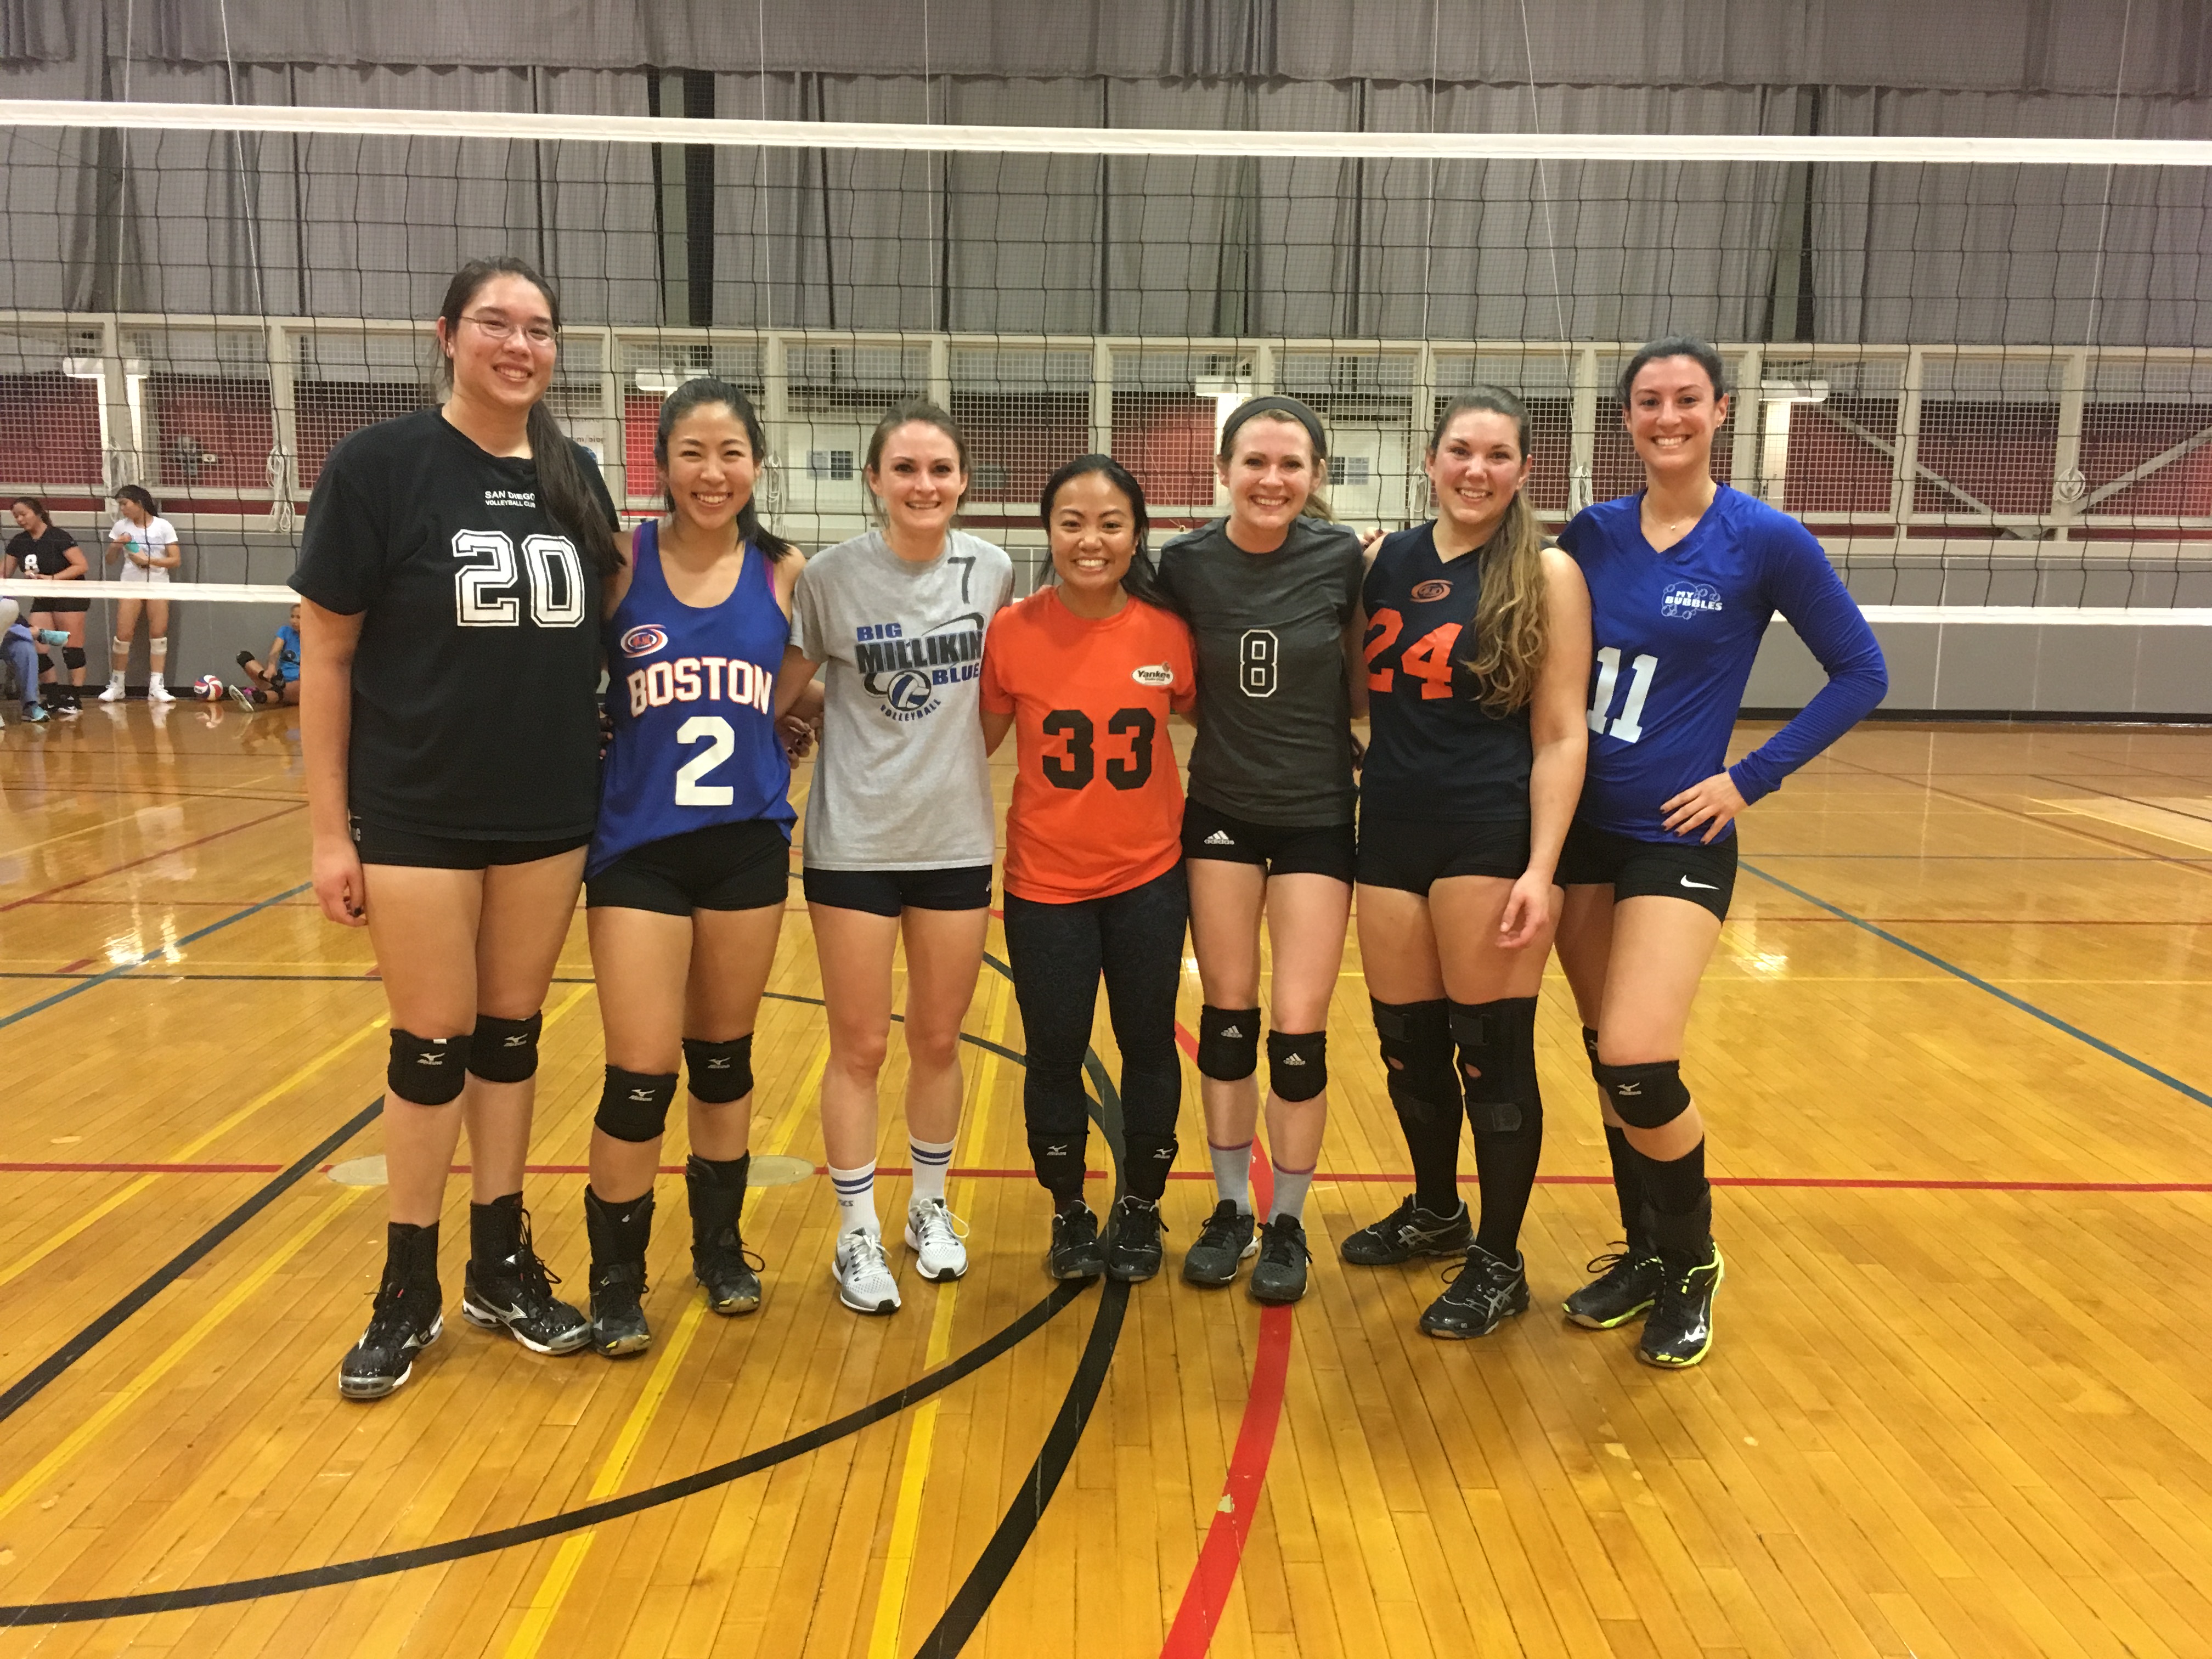 11/4/18 Volleylumptous wins WC+ at MIT over Tensegrity